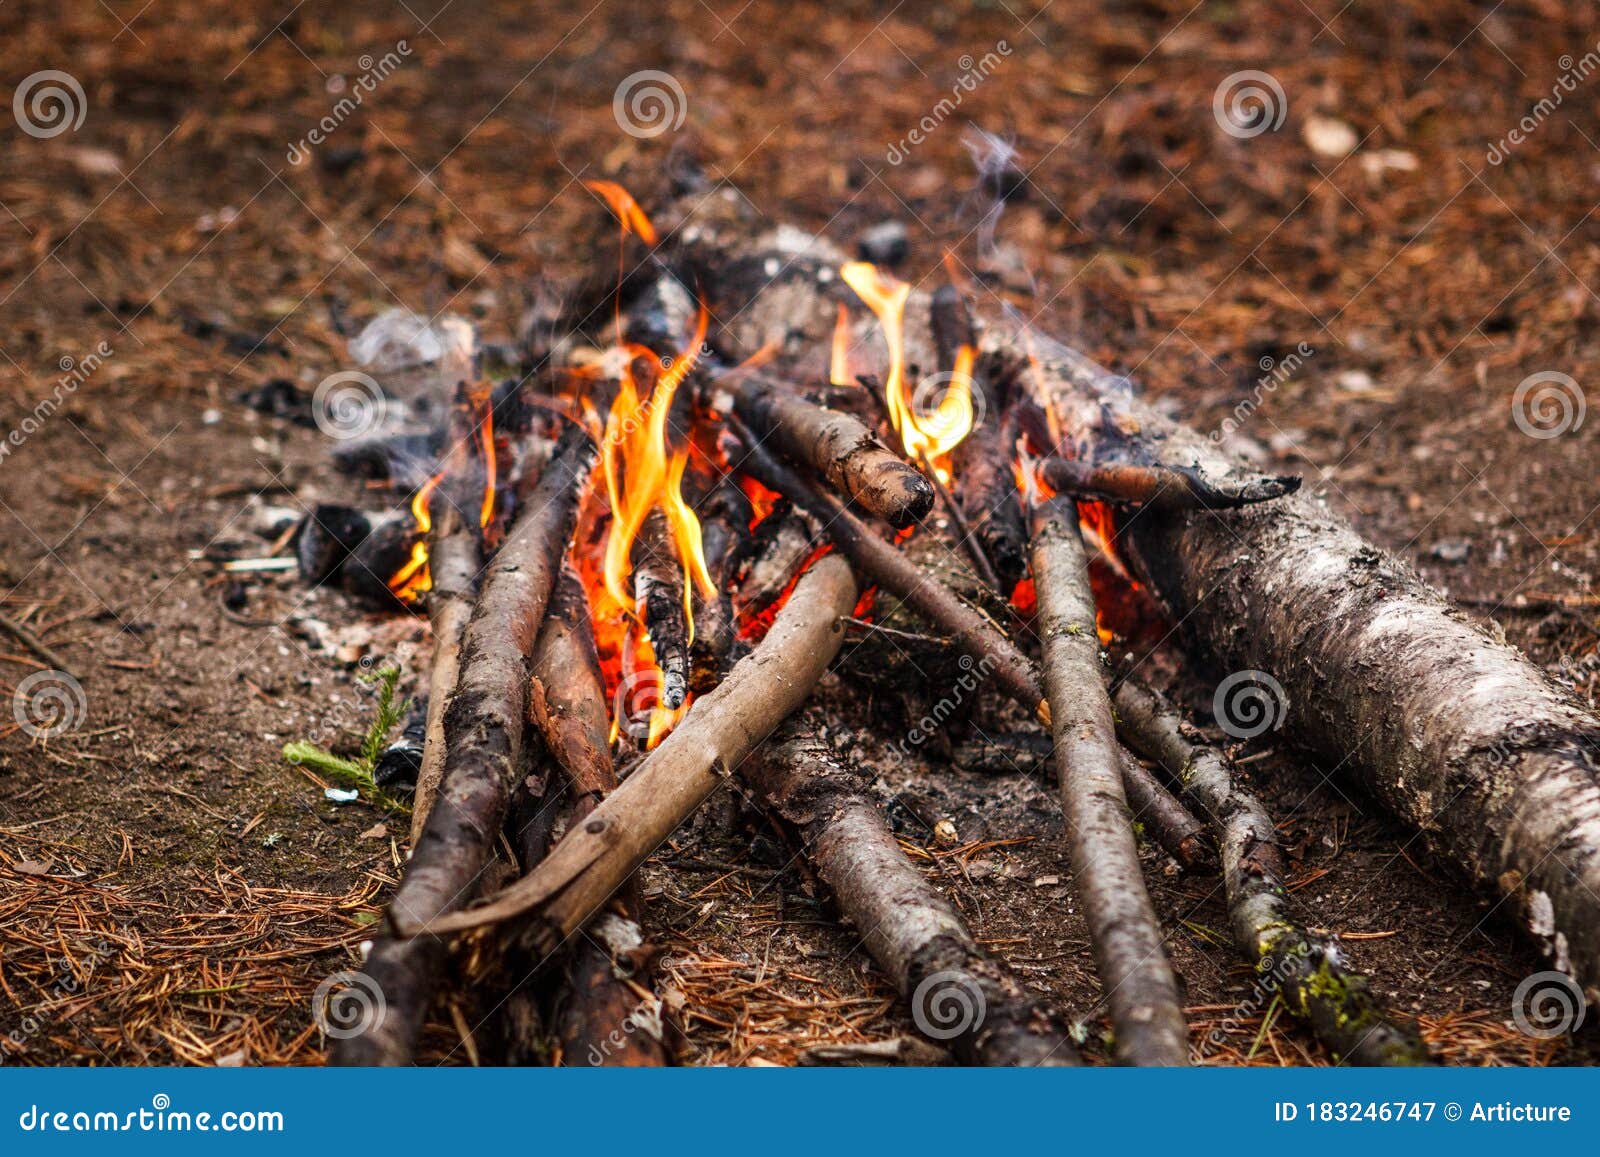 Bonfire in Autumn Forest. Family Weekend. Stock Image - Image of focus ...